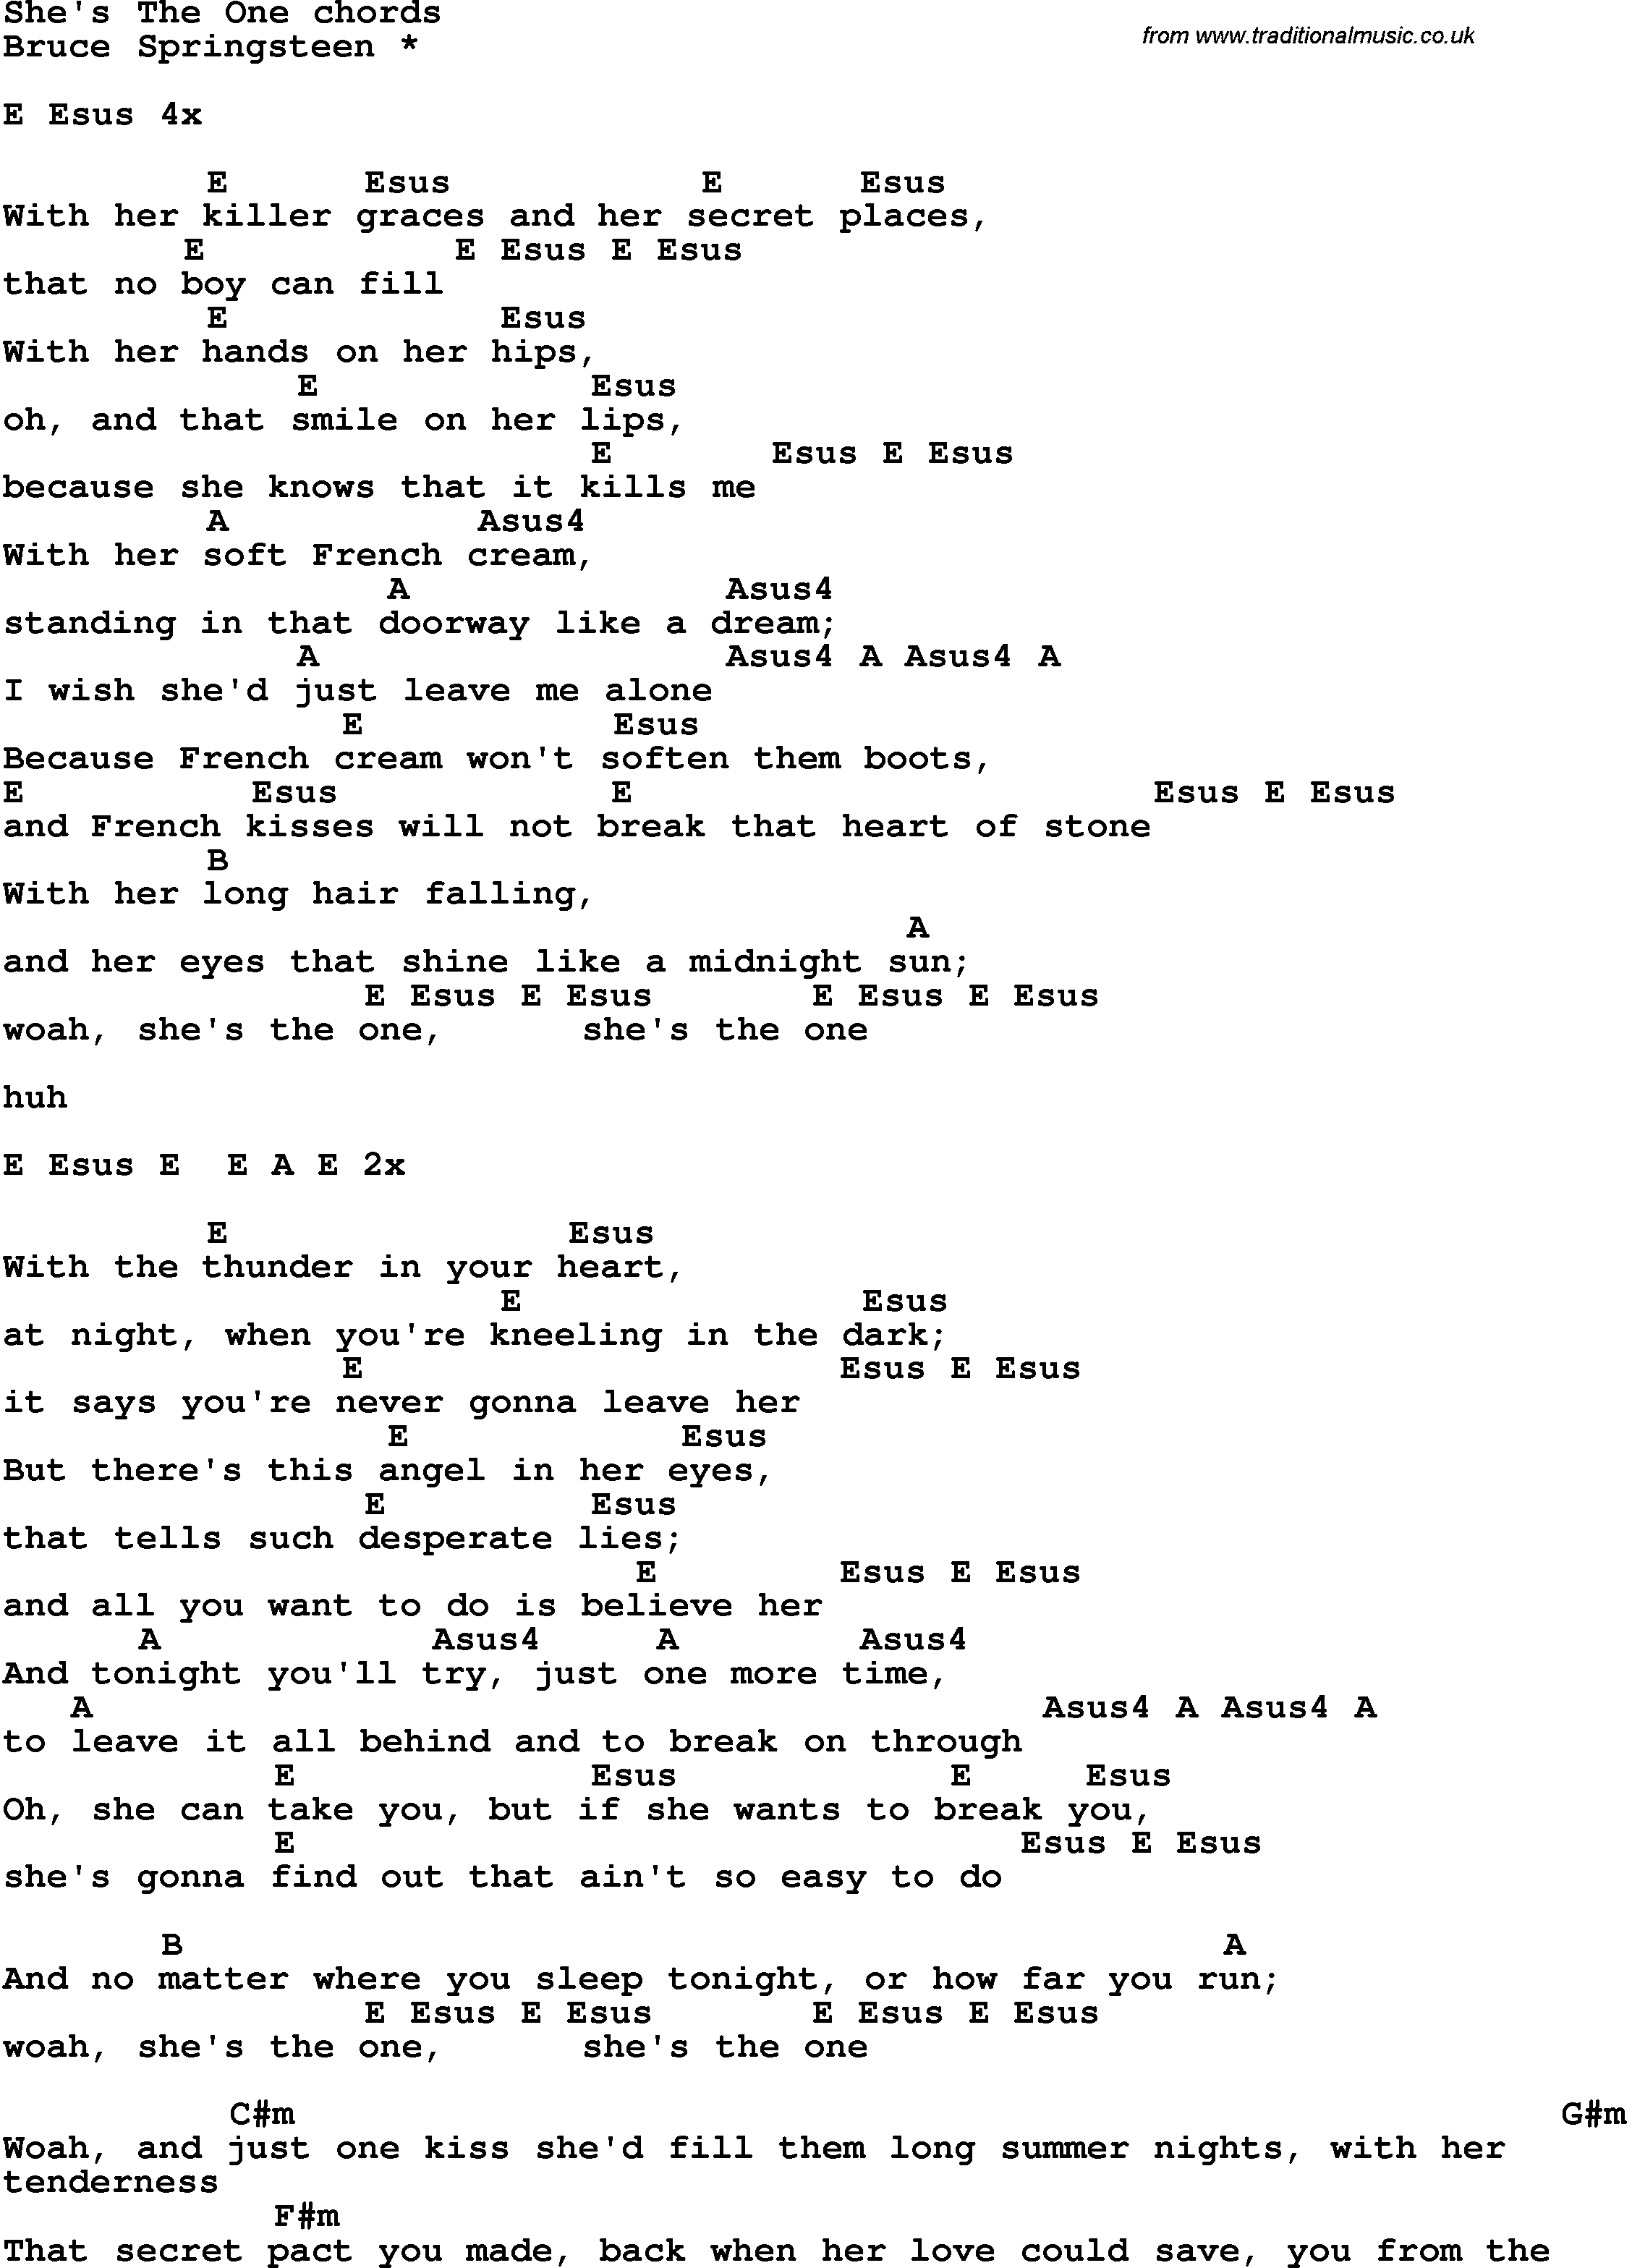 Song Lyrics with guitar chords for She's The One